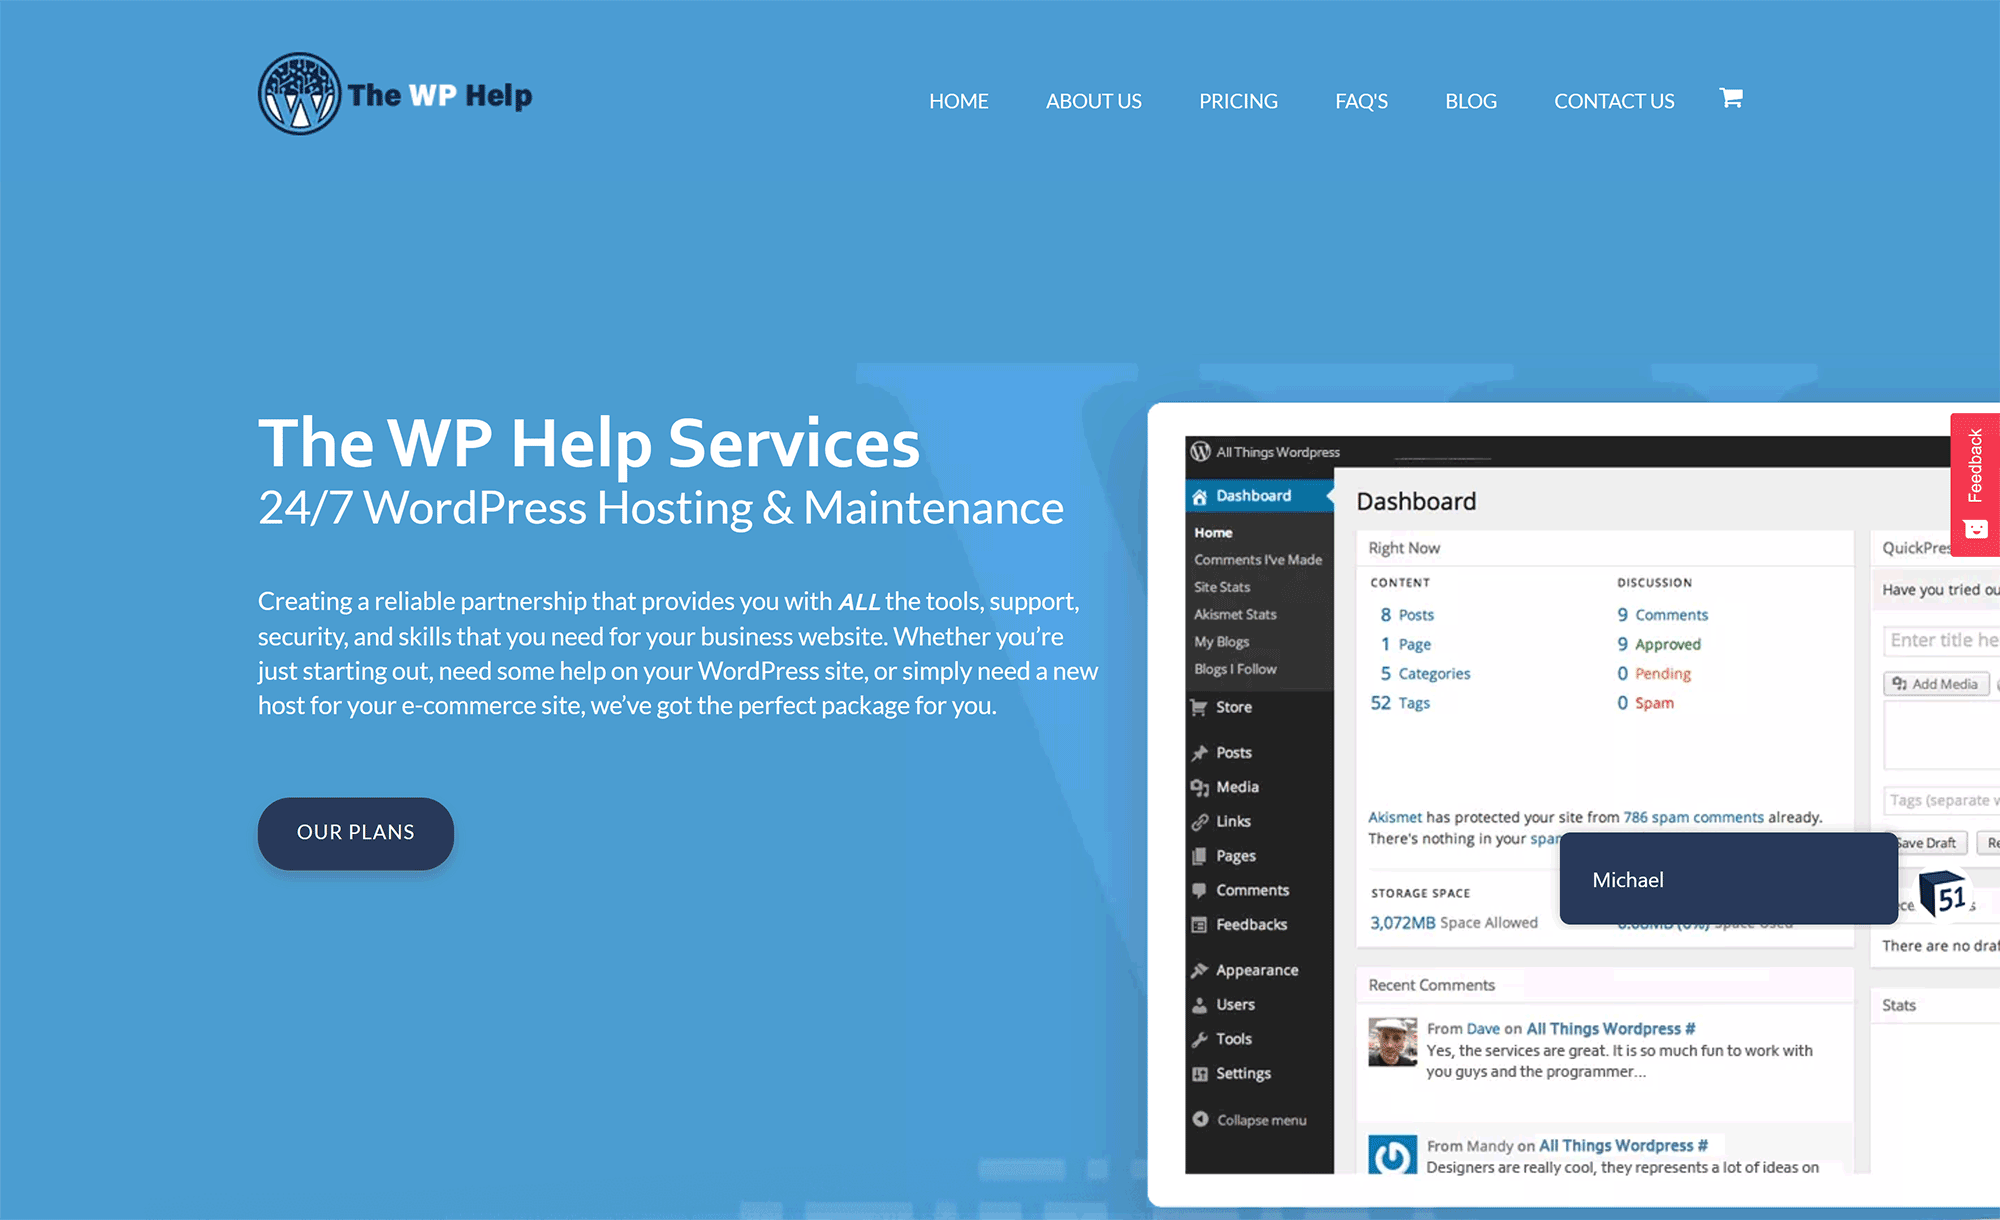 The WP Help